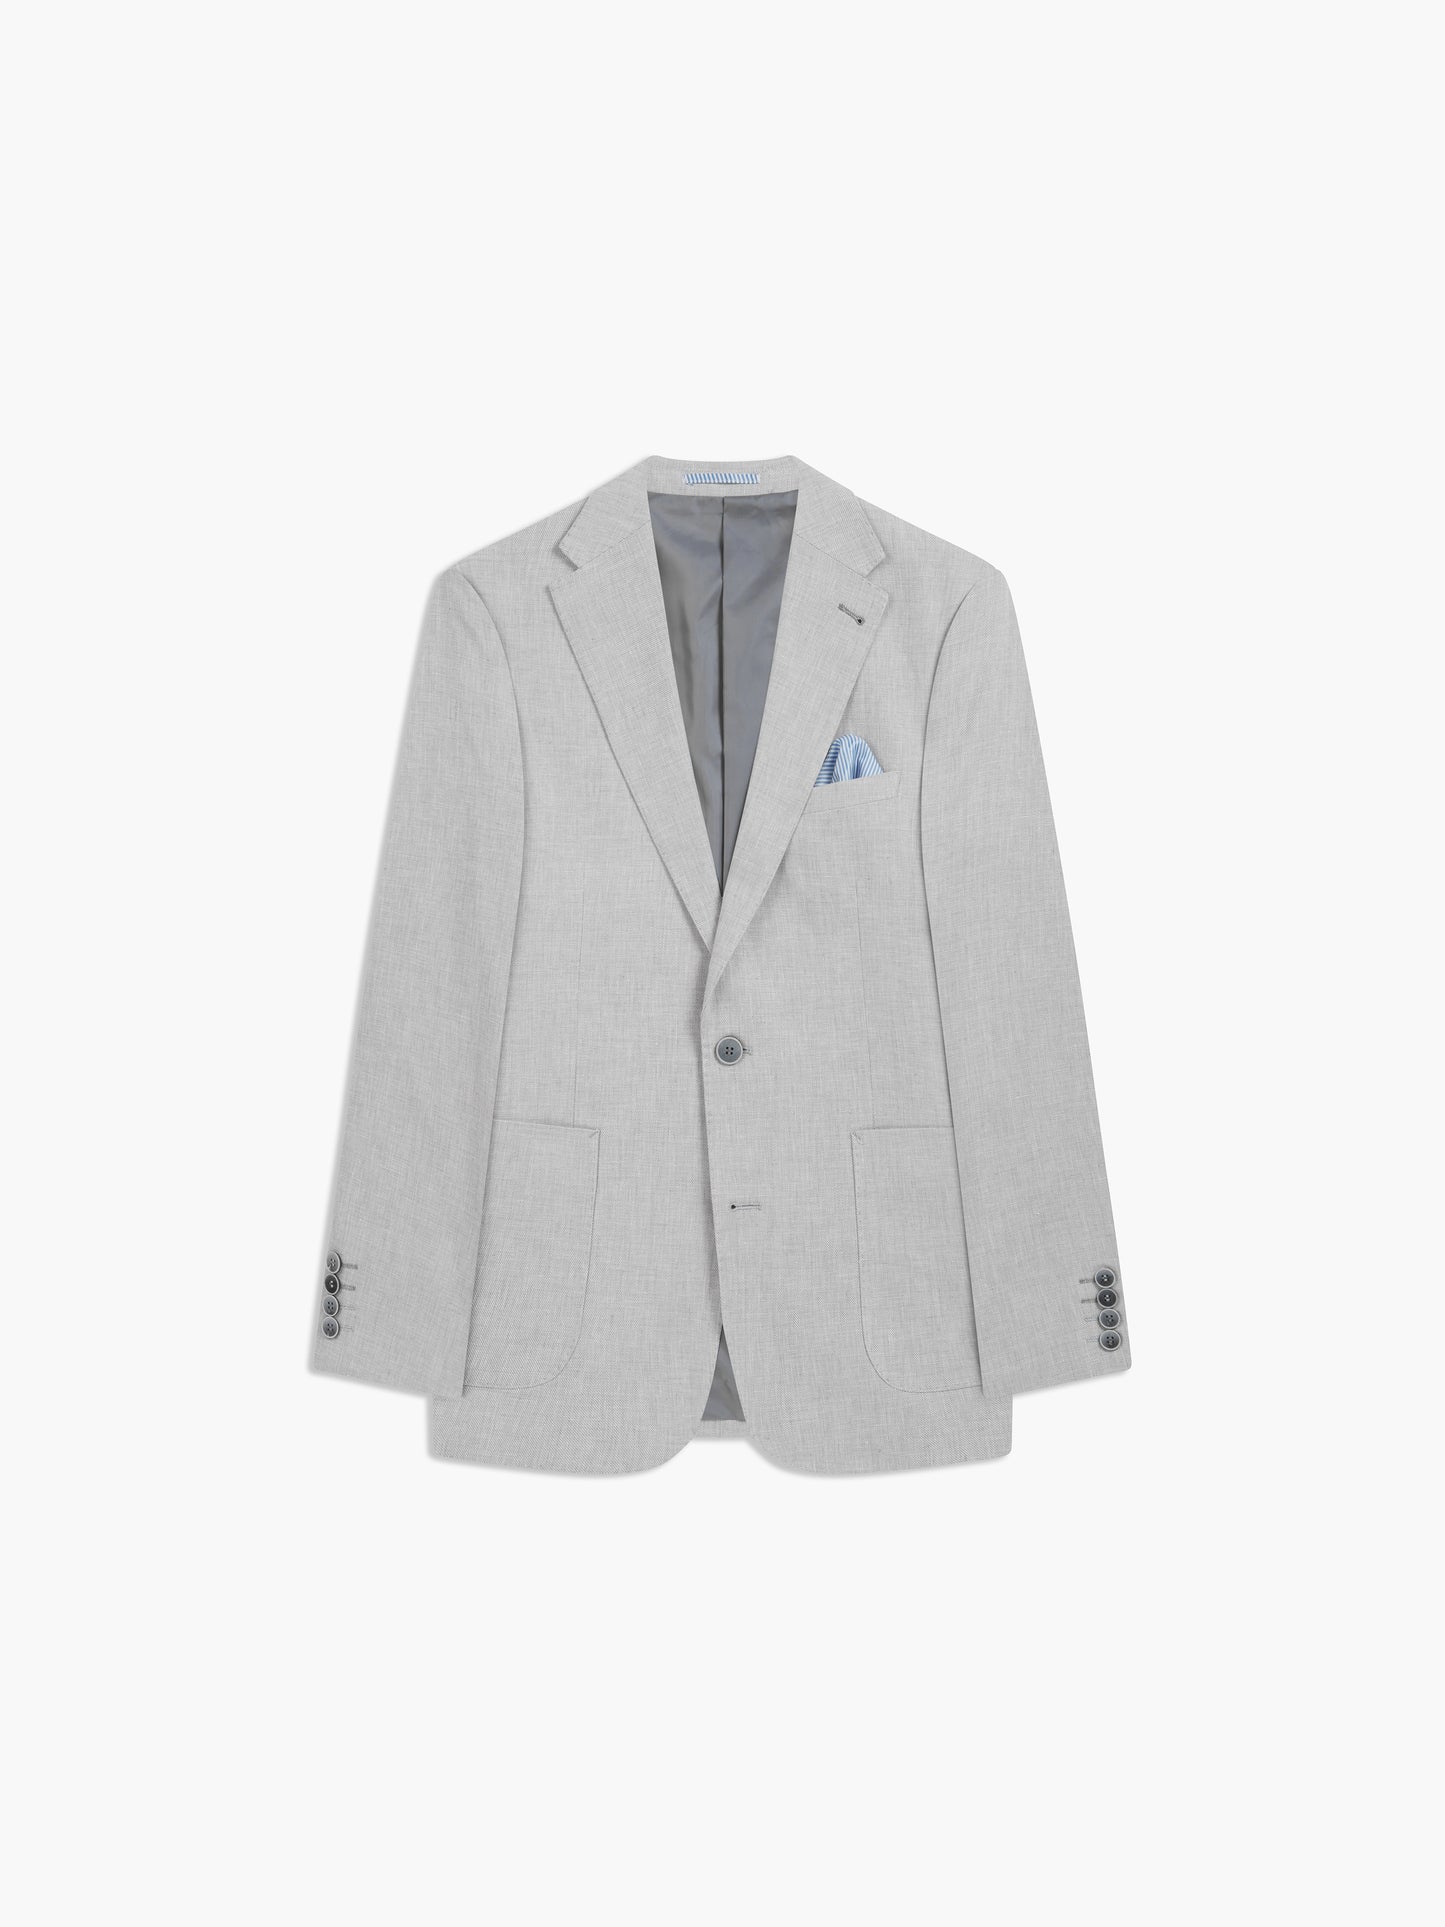 Image 7 of Slim Fit Single Breasted Linen Suit Jacket in Light Grey